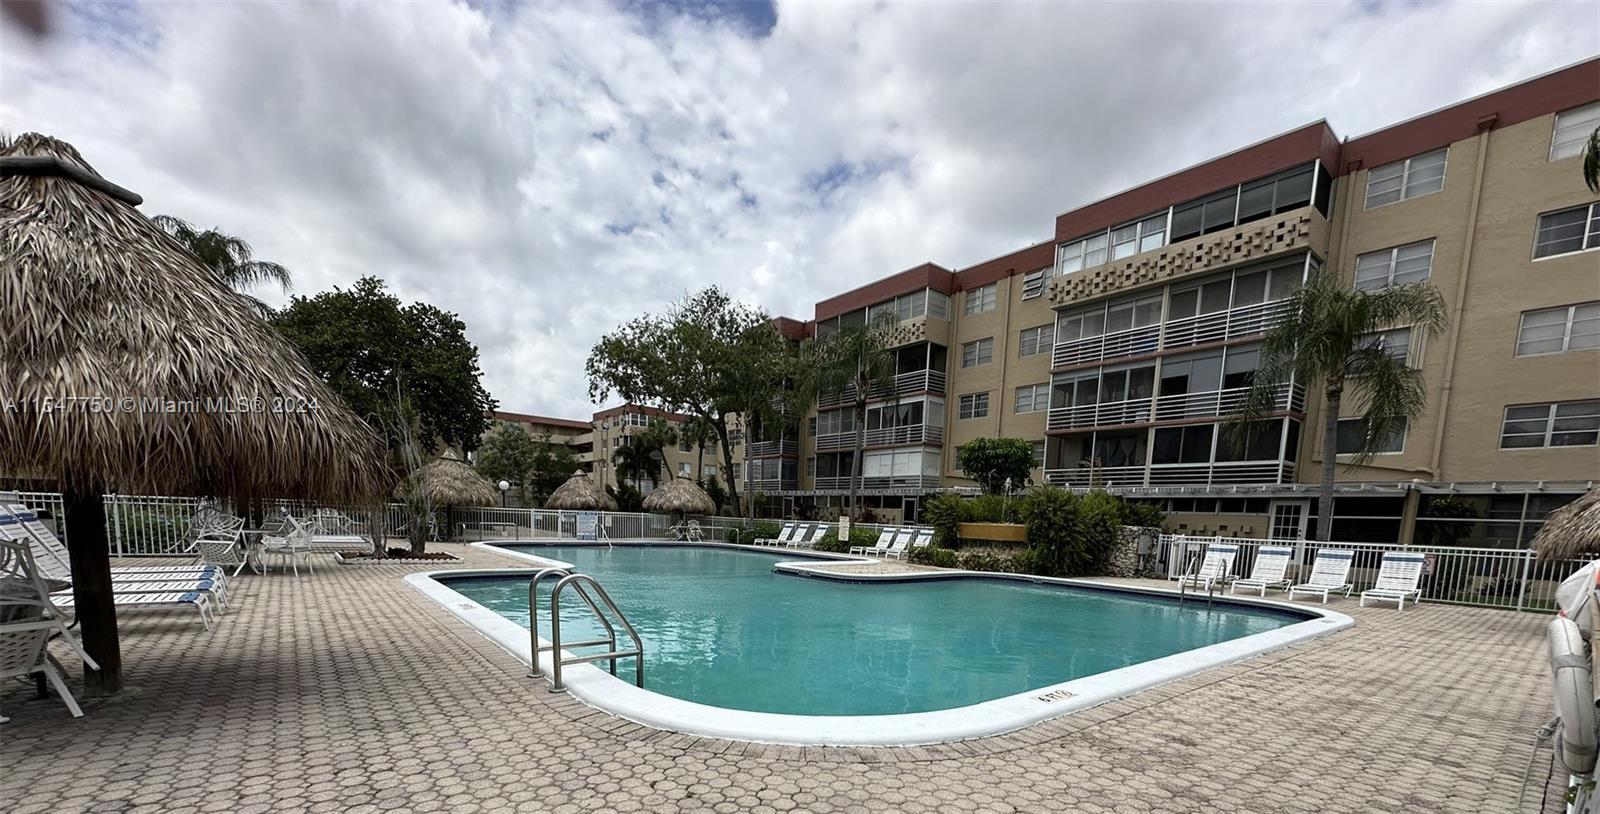 Photo of 408 NW 68th Ave #303 in Plantation, FL